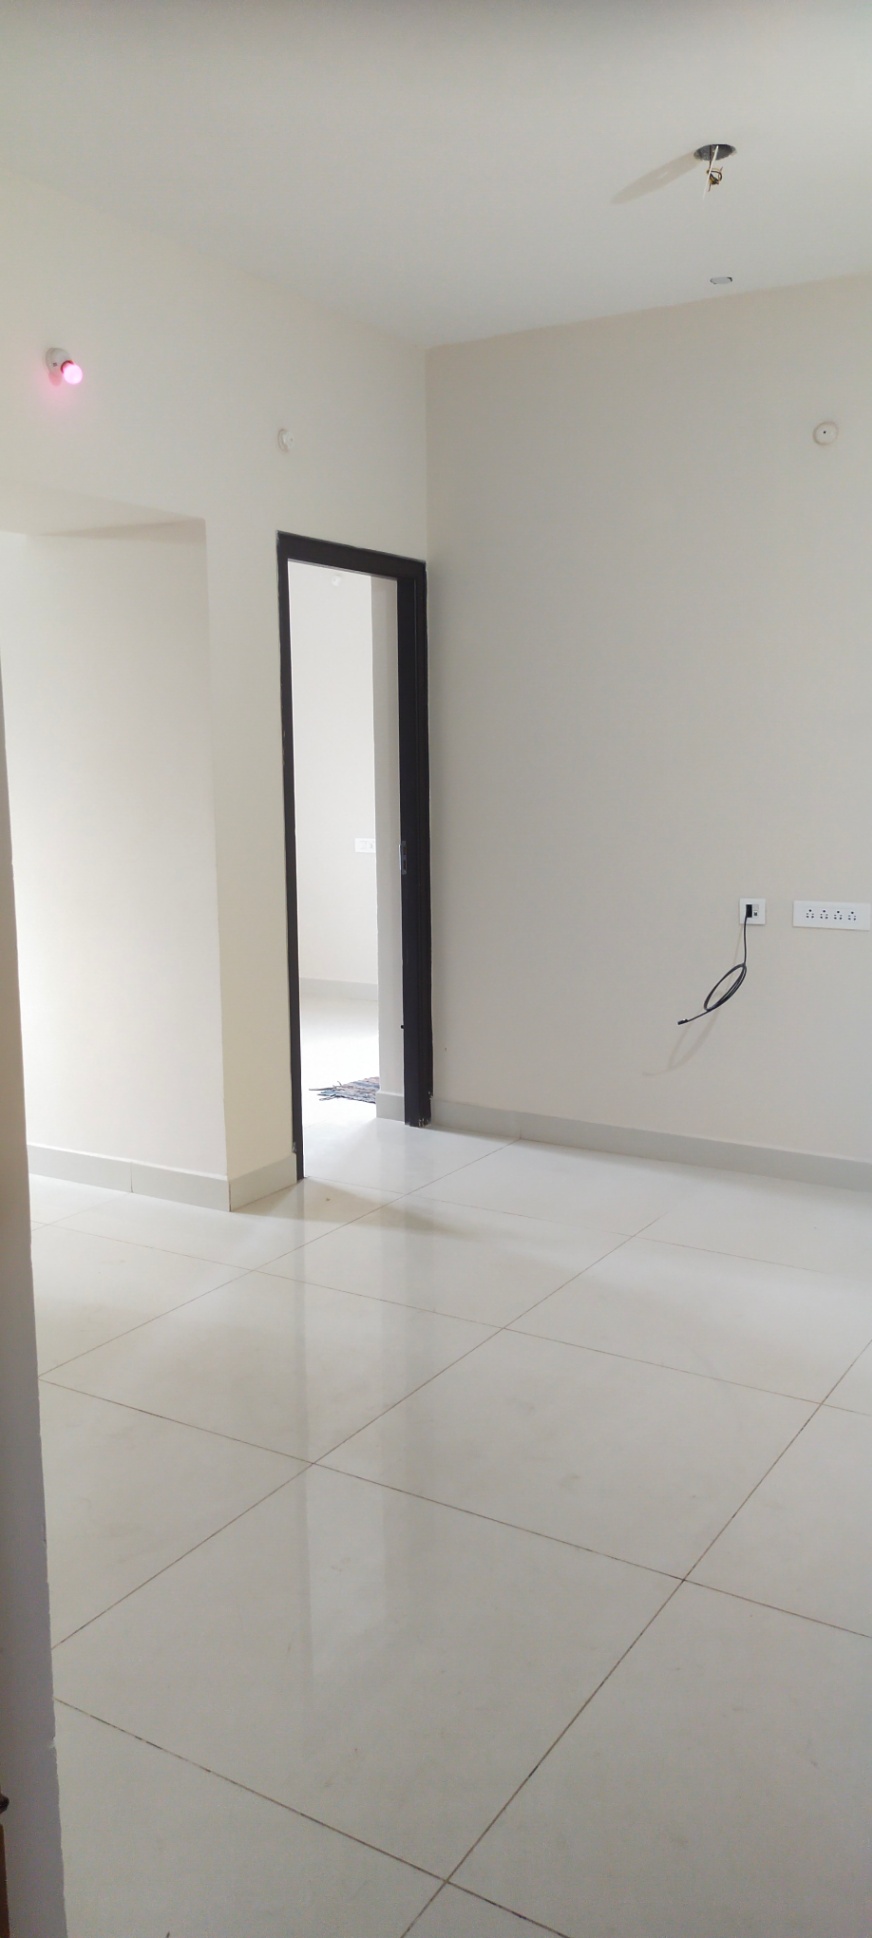 1 Bed/ 1 Bath Sell Apartment/ Flat; 489 sq. ft. carpet area; New Construction for sale @Elur road